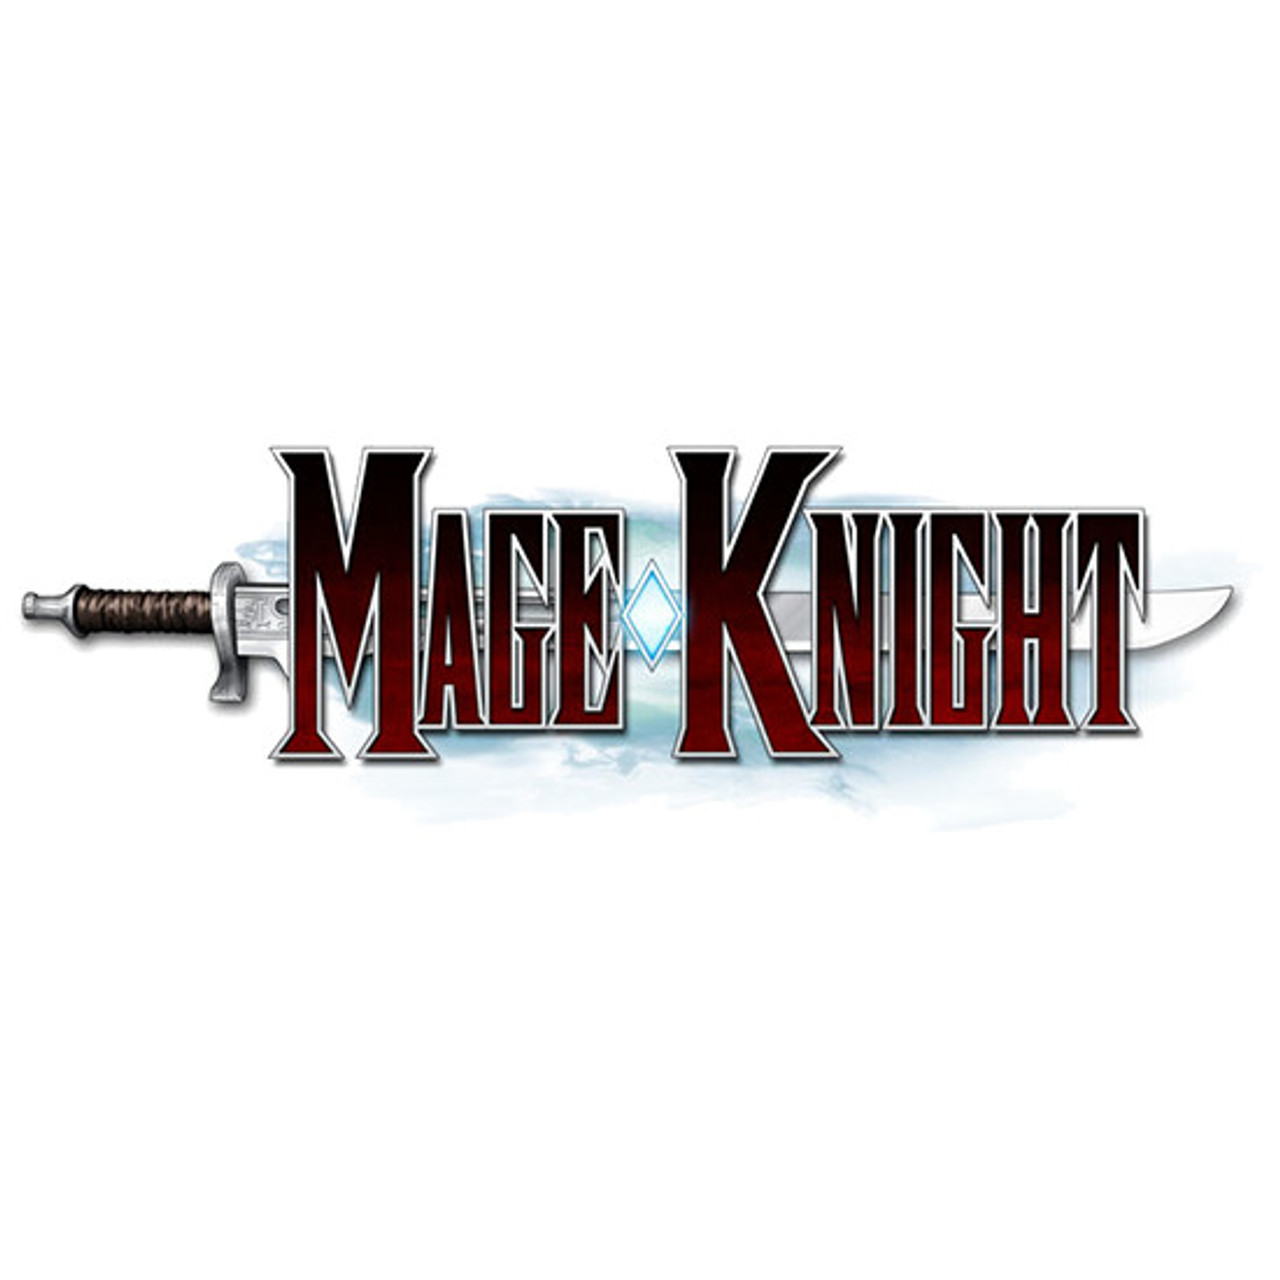 mage knight sorcery checklist clipart